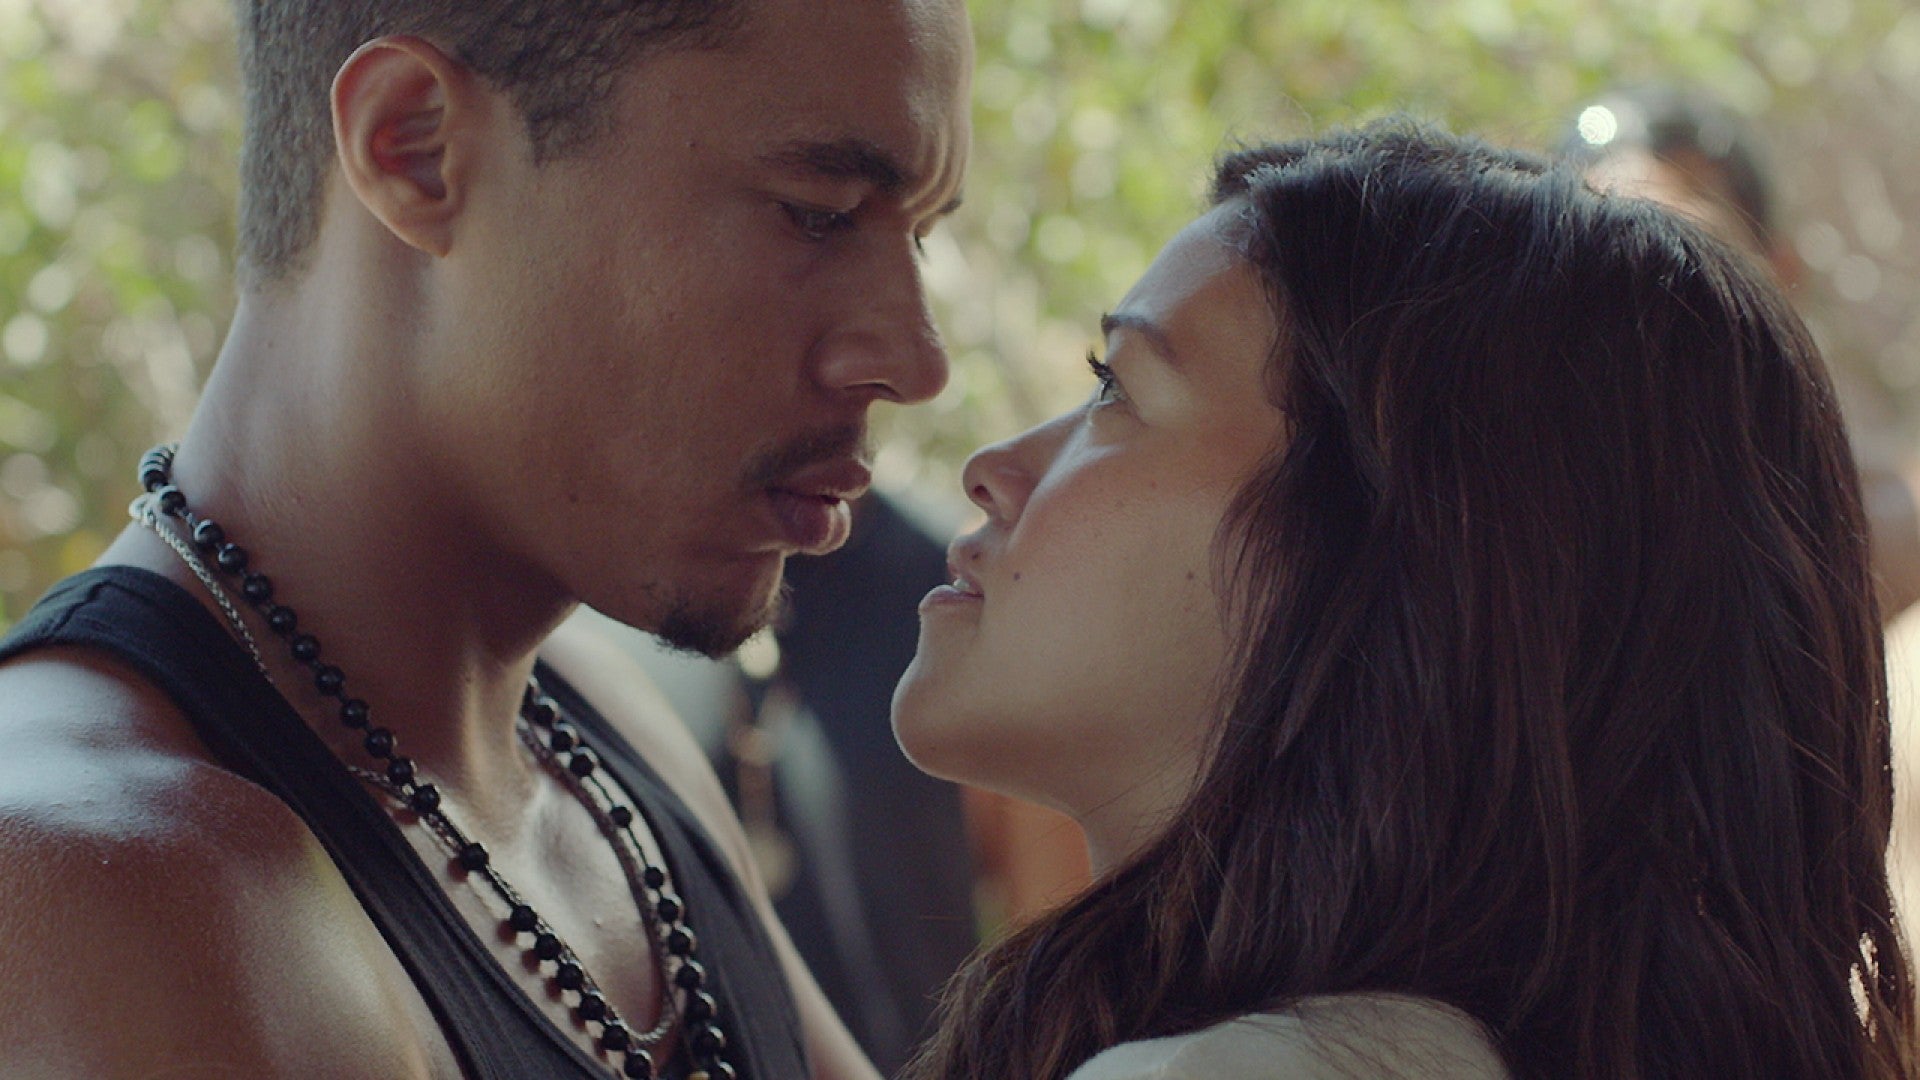 Gina Rodriguez Shares an Intense Kiss in This Miss Bala Deleted Scene (Exclusive)